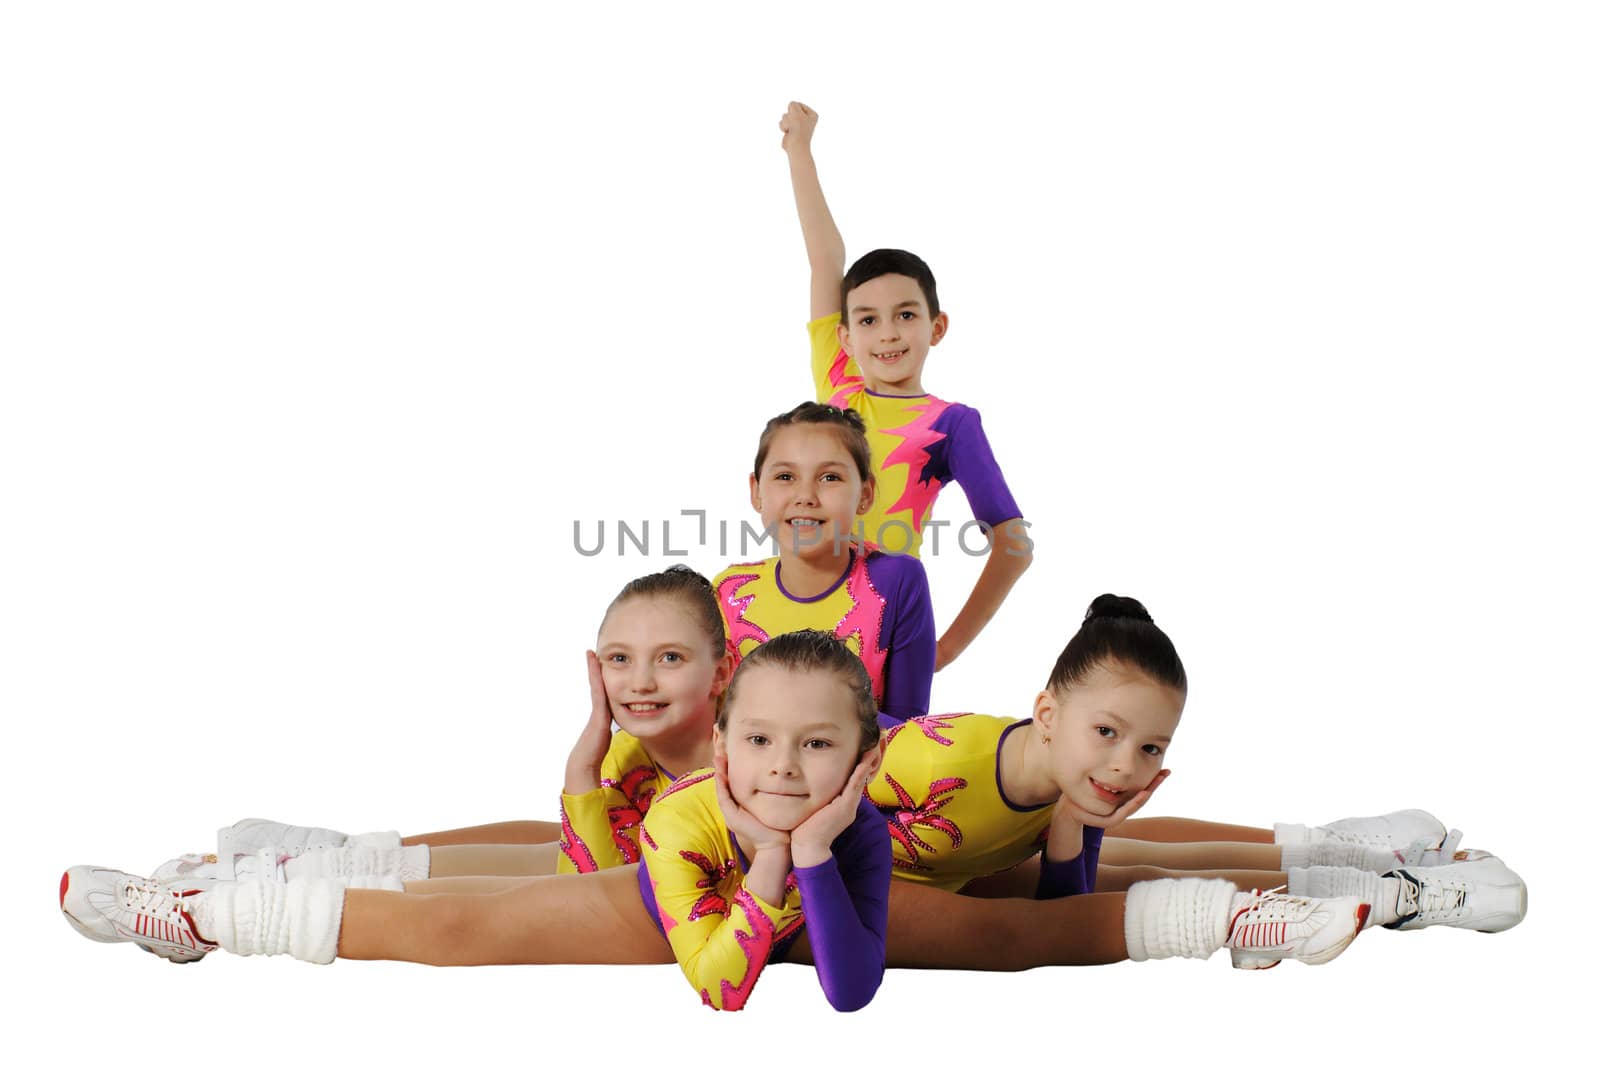 Performance by the young athlete aerobics on the white background
